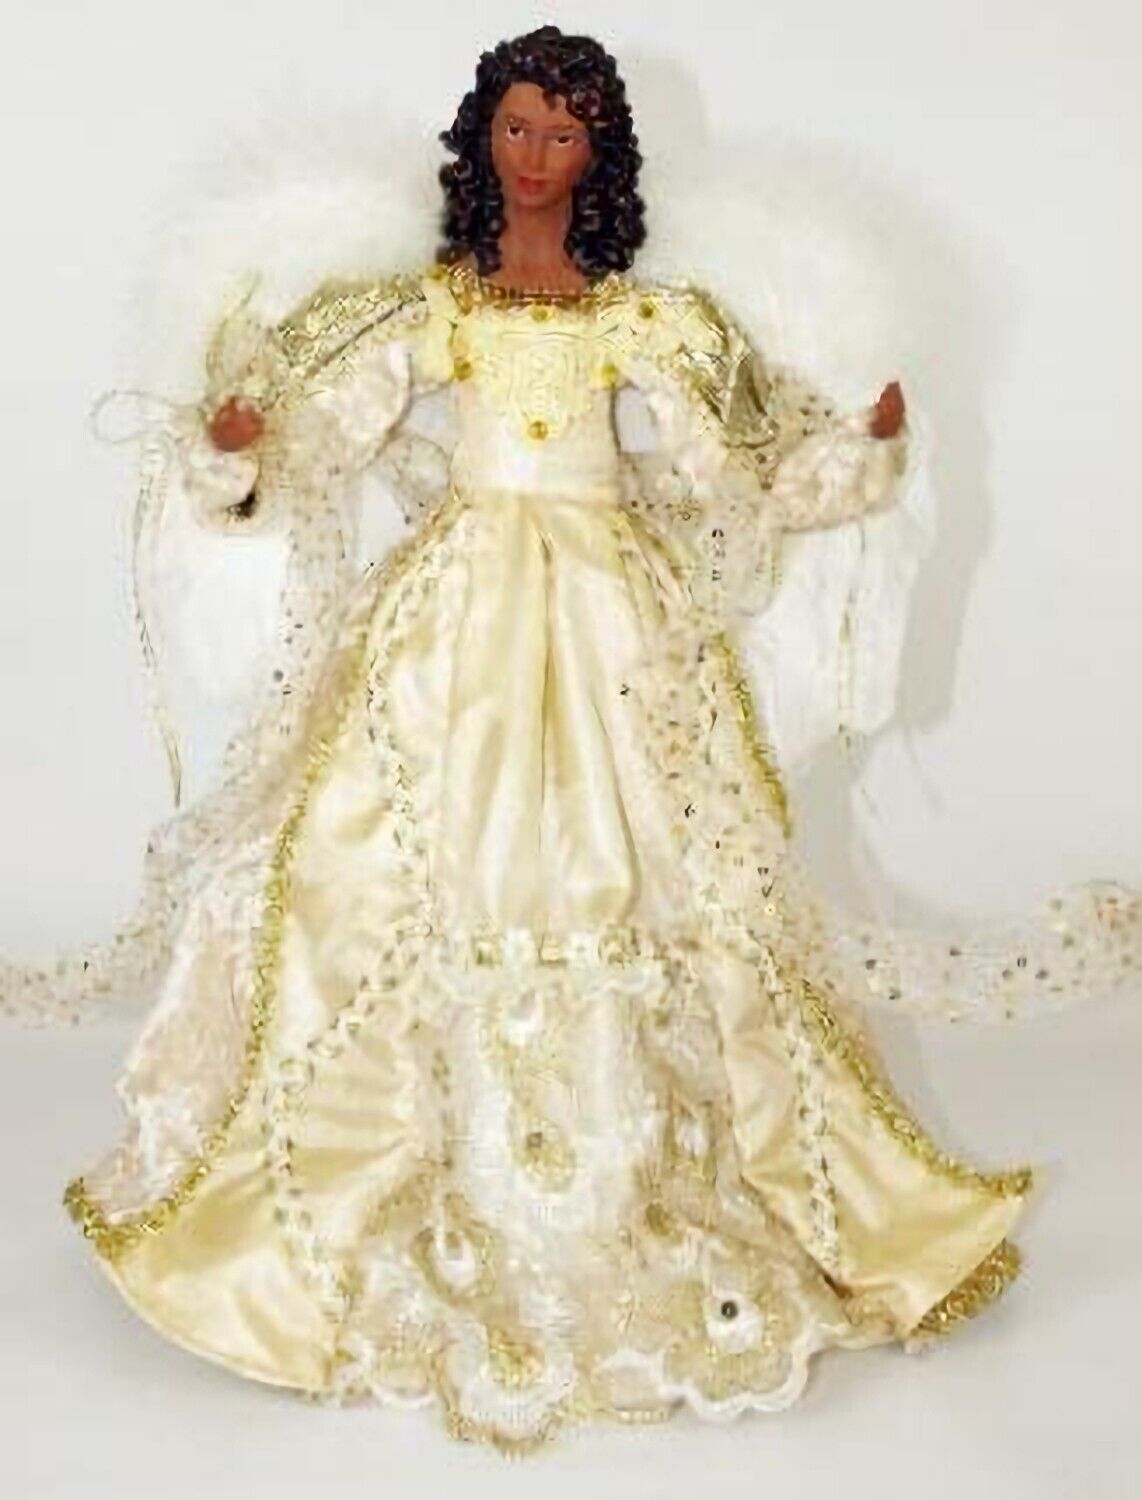 16IN AFRICAN AMERICAN ANGEL IN CREAM/GOLDEN DRESS HOLIDAY CHRSTMAS DECOR